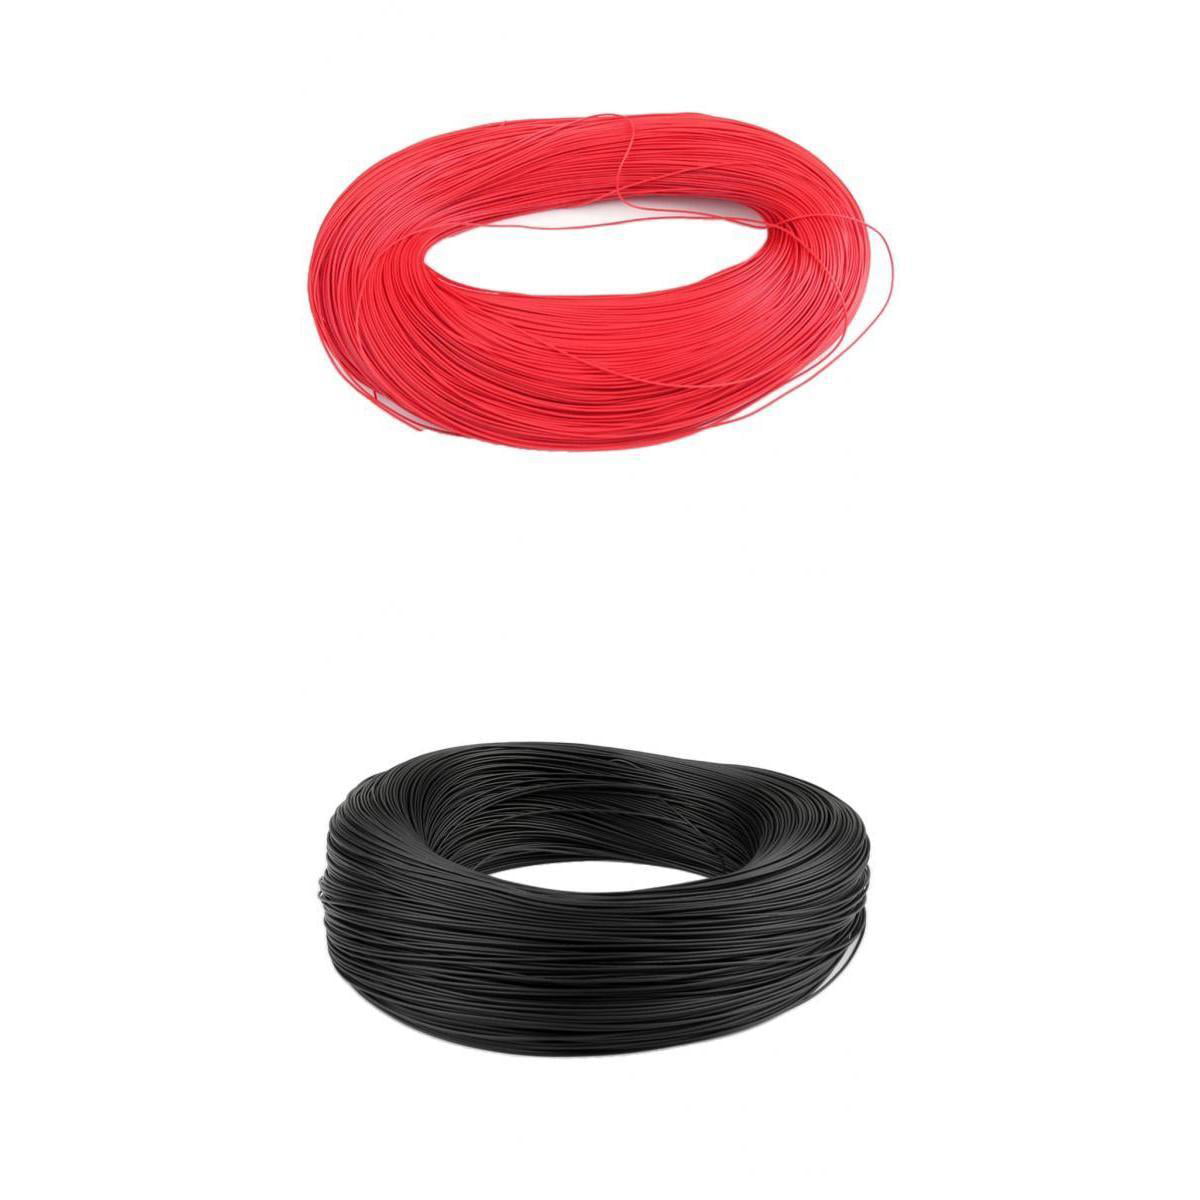 Ten Colors UL-1007 24AWG Wires Kit each color 6.56FT . 